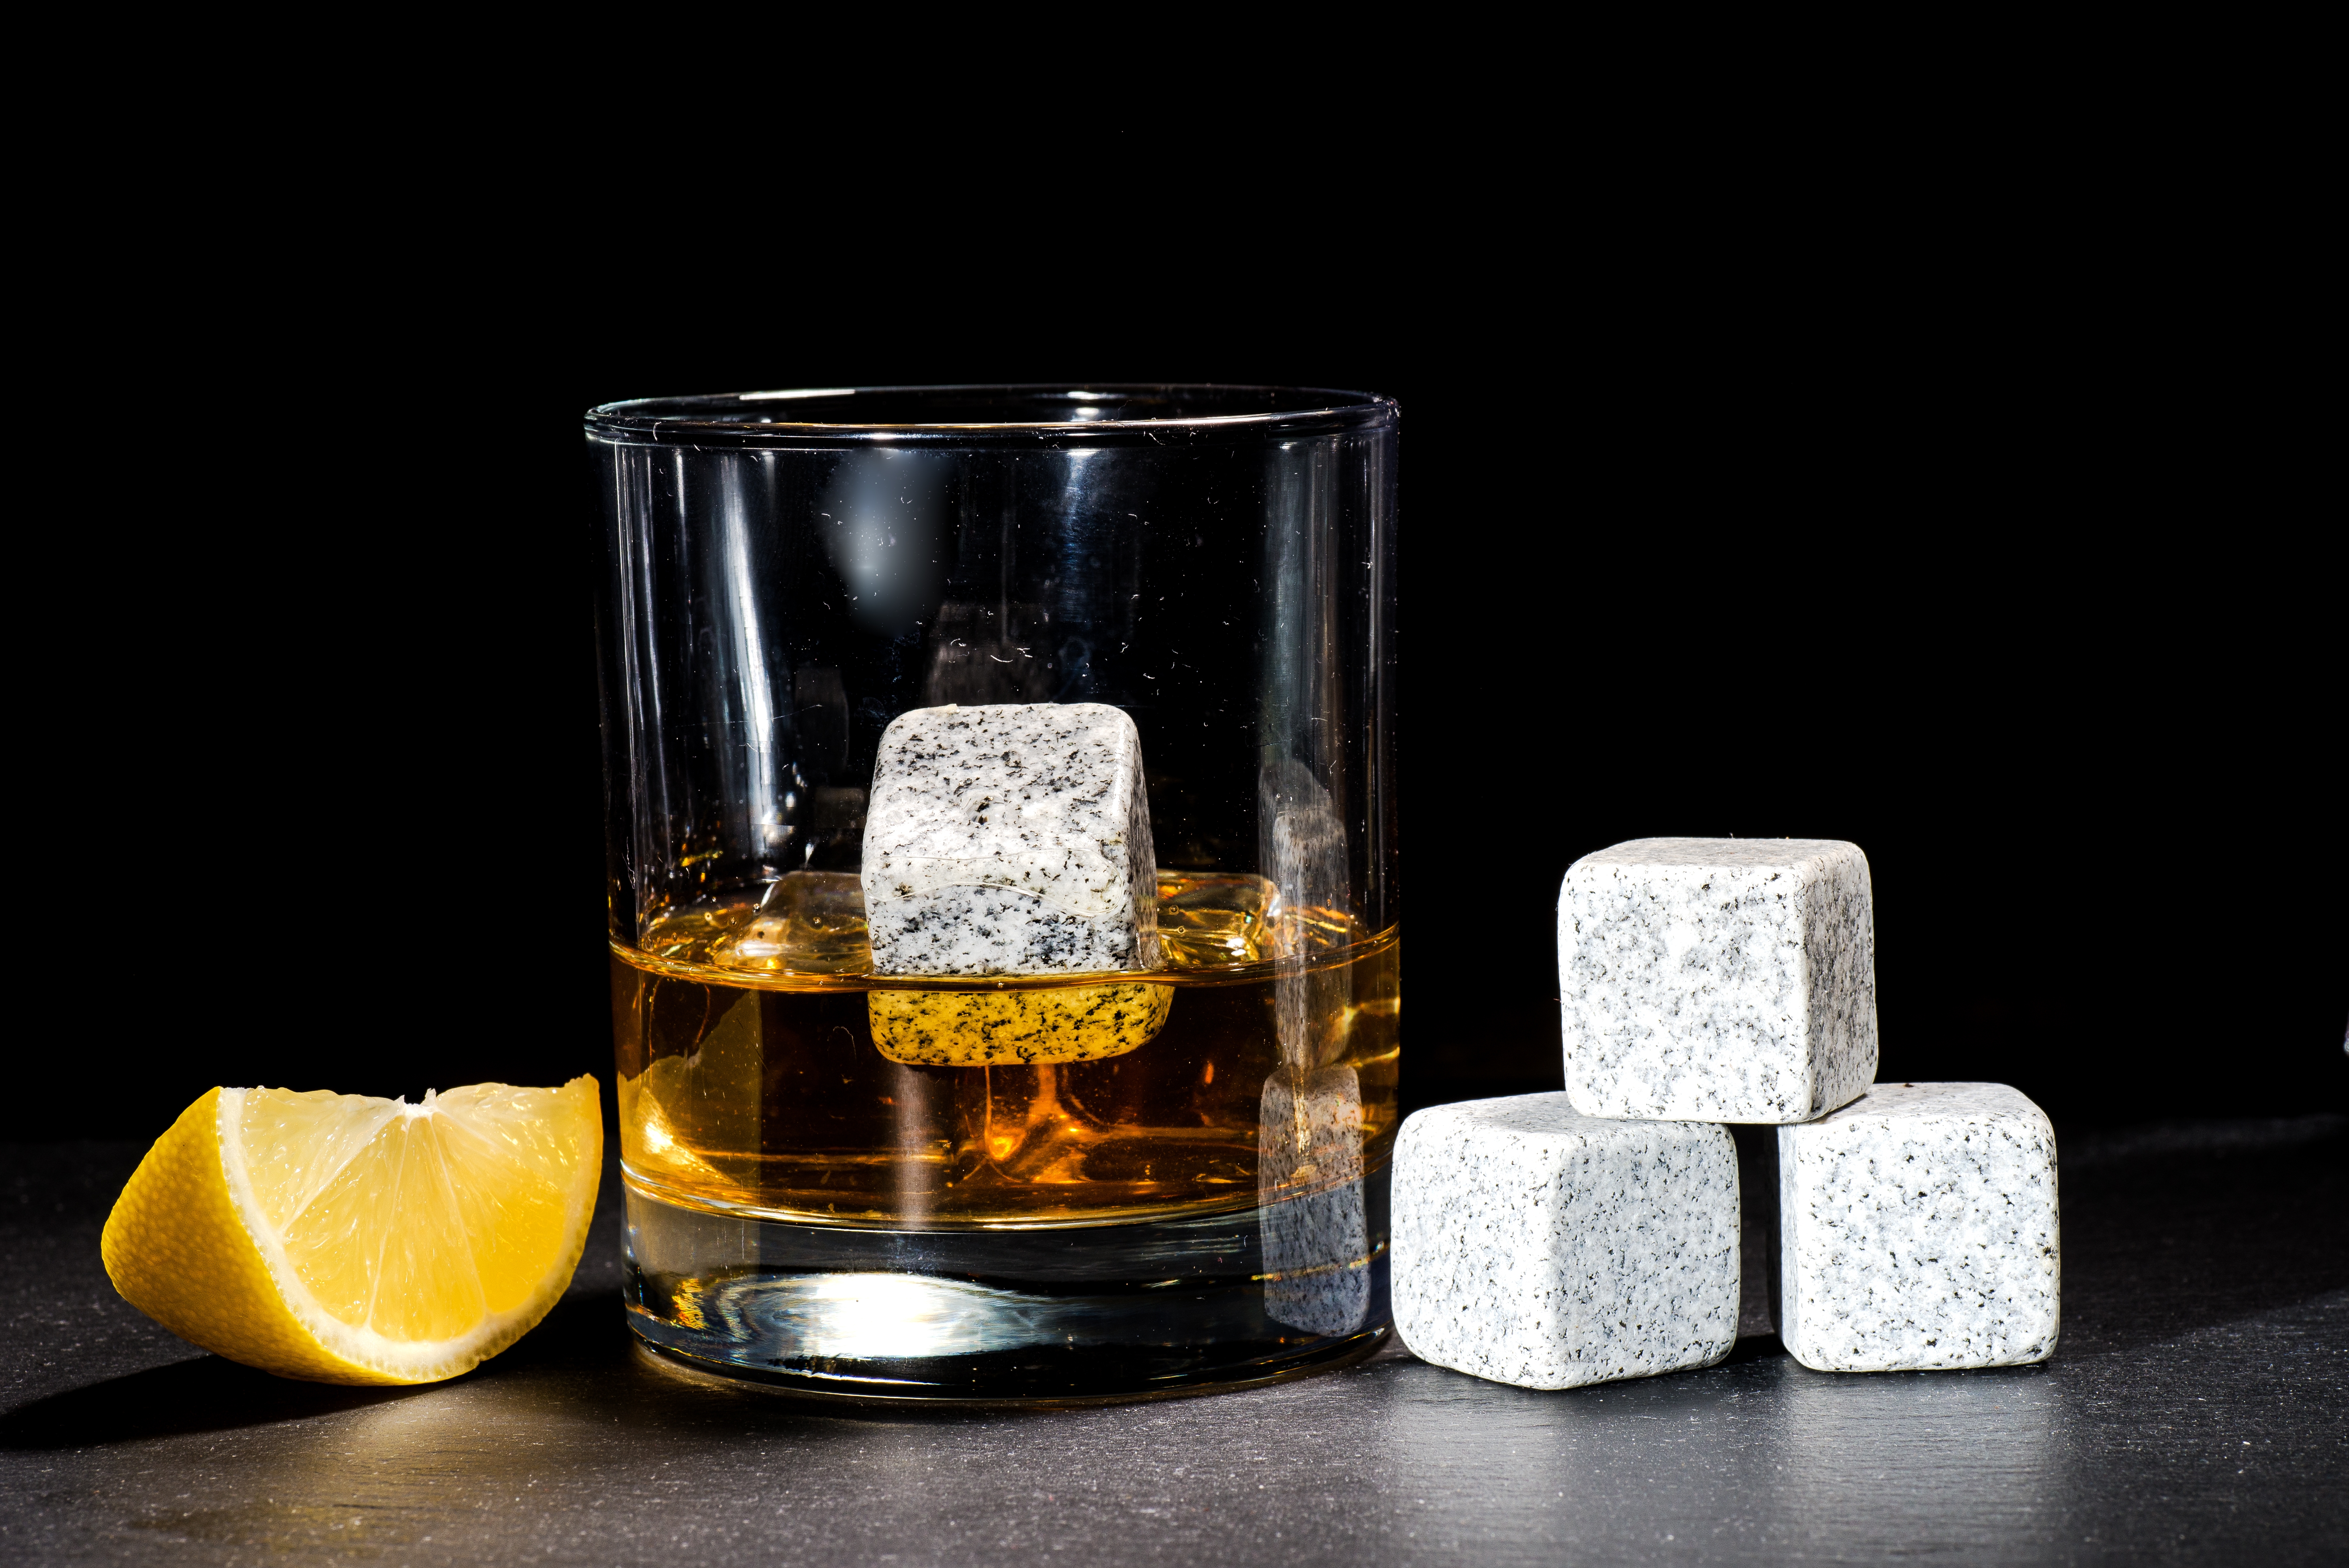 Whiskey with stones in a glass | Source: Shutterstock